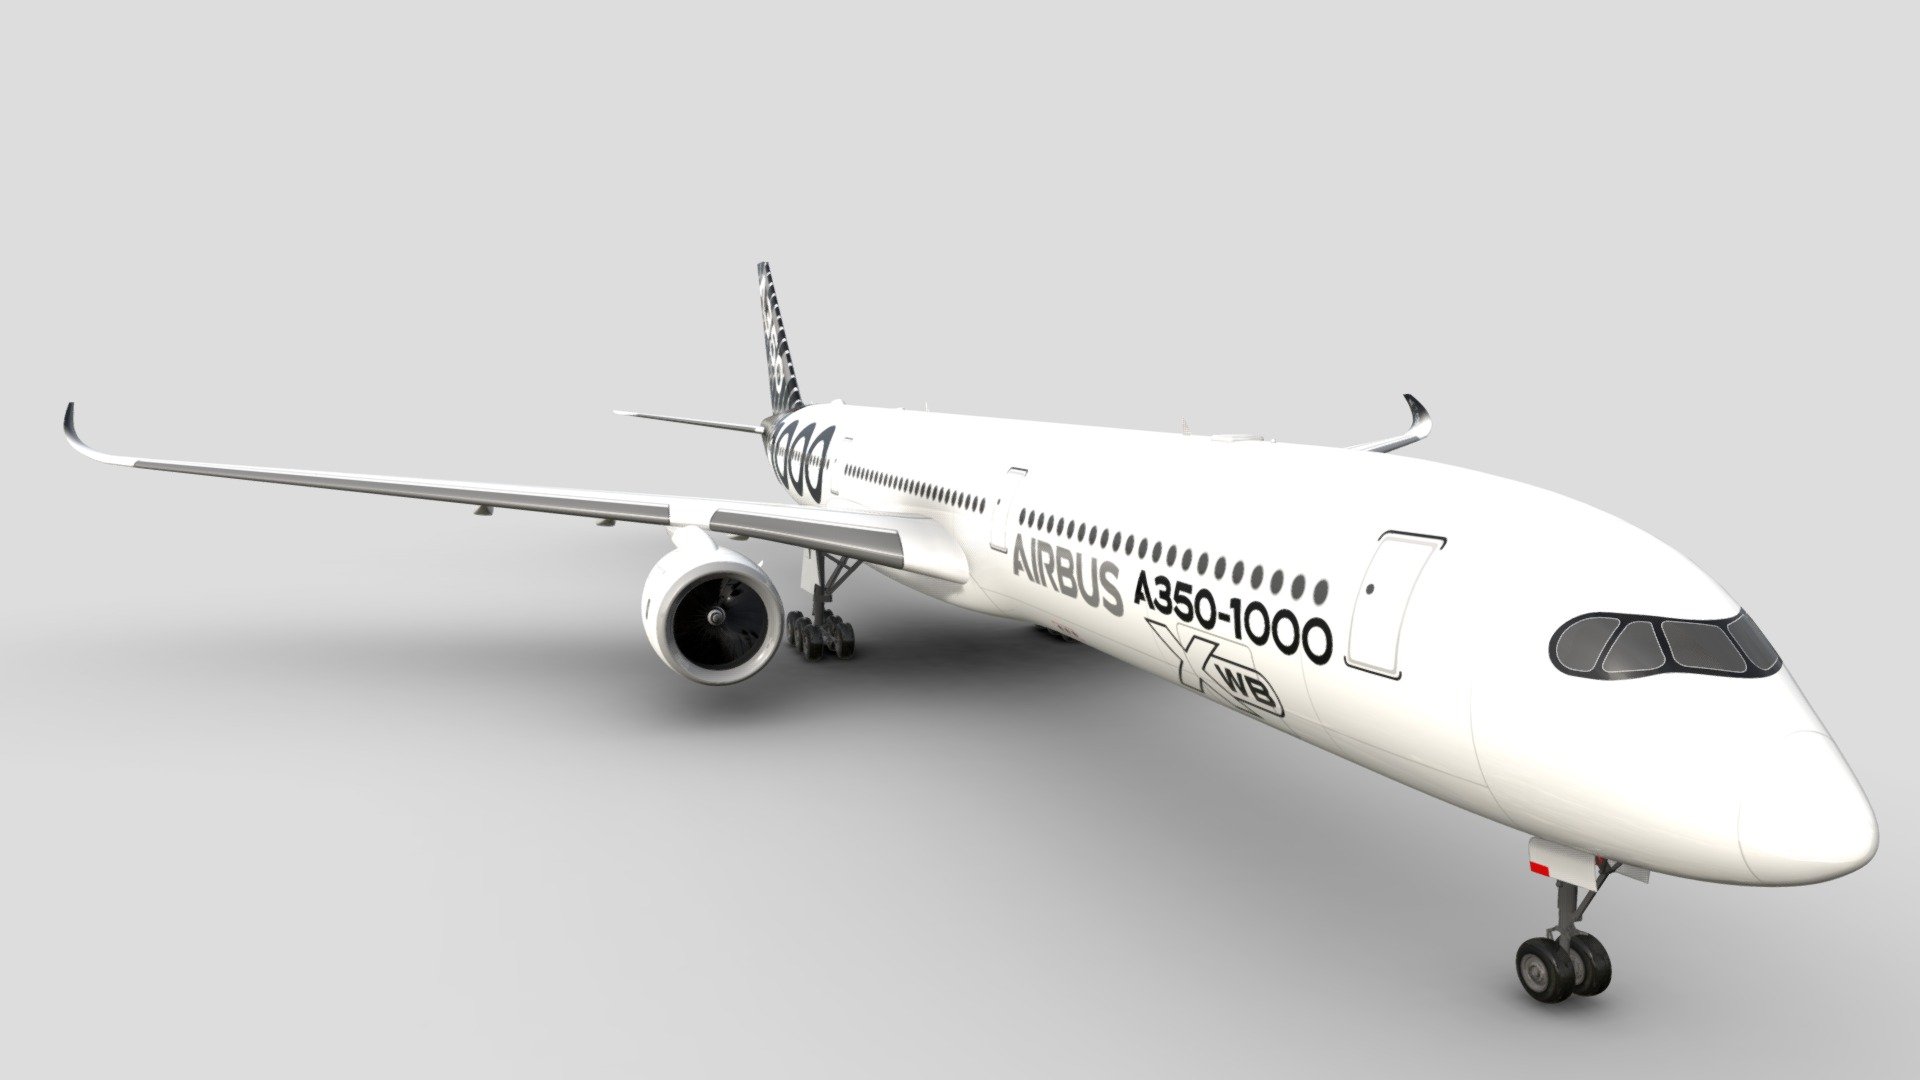 Still in modeling. Will be updated on sketchfab as progress is made. For Geo-FS Flight sim. Textures started/almost done. NEW A350-1000 - A350-1000 Updated (WIP) - 3D model by Nightshade3325 3d model